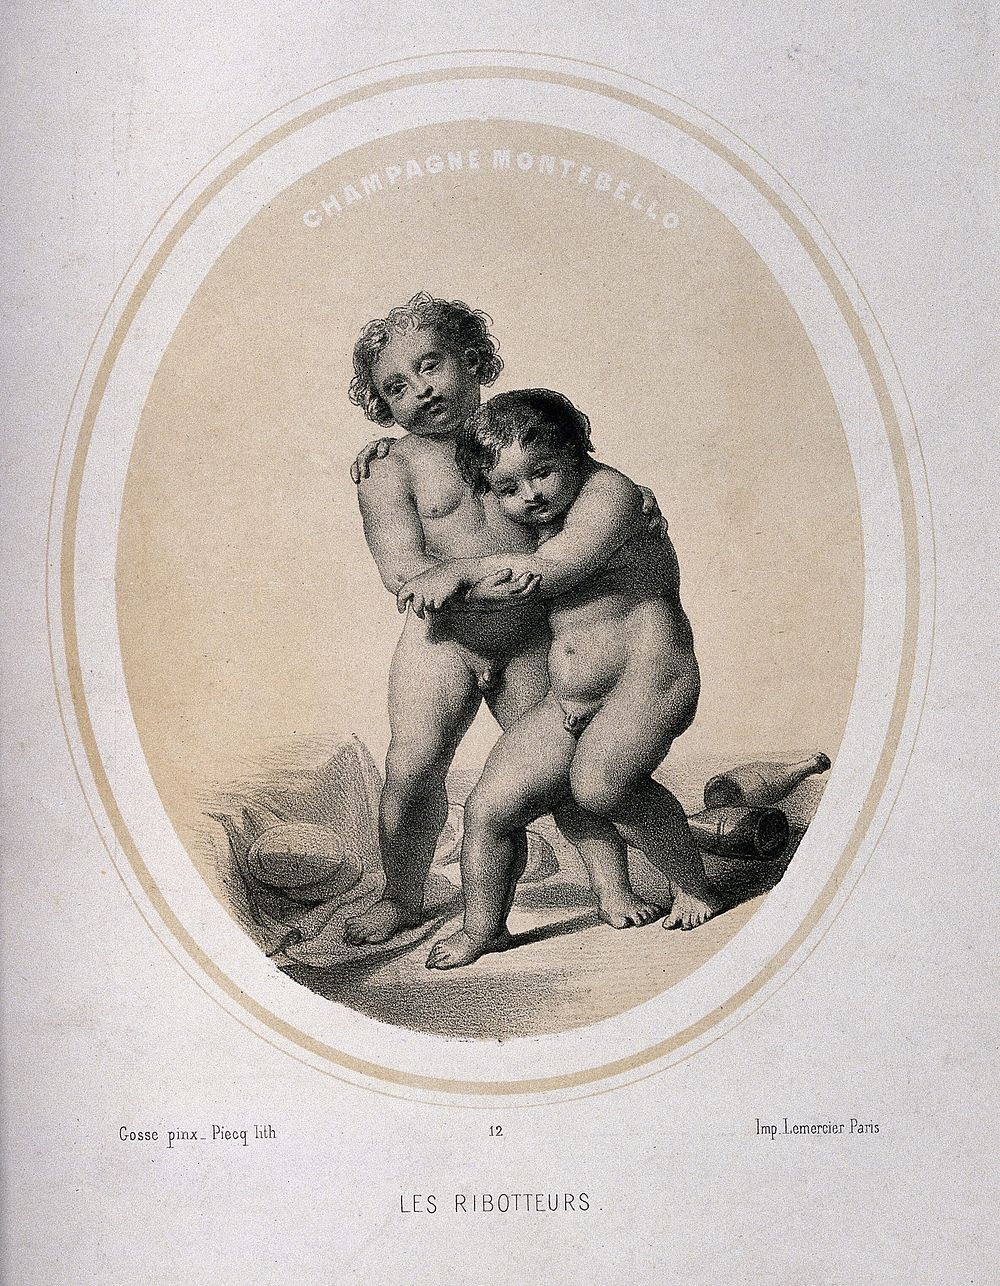 Two naked children in a drunken state. Lithograph by Piecq, c. 1845, after Gosse.